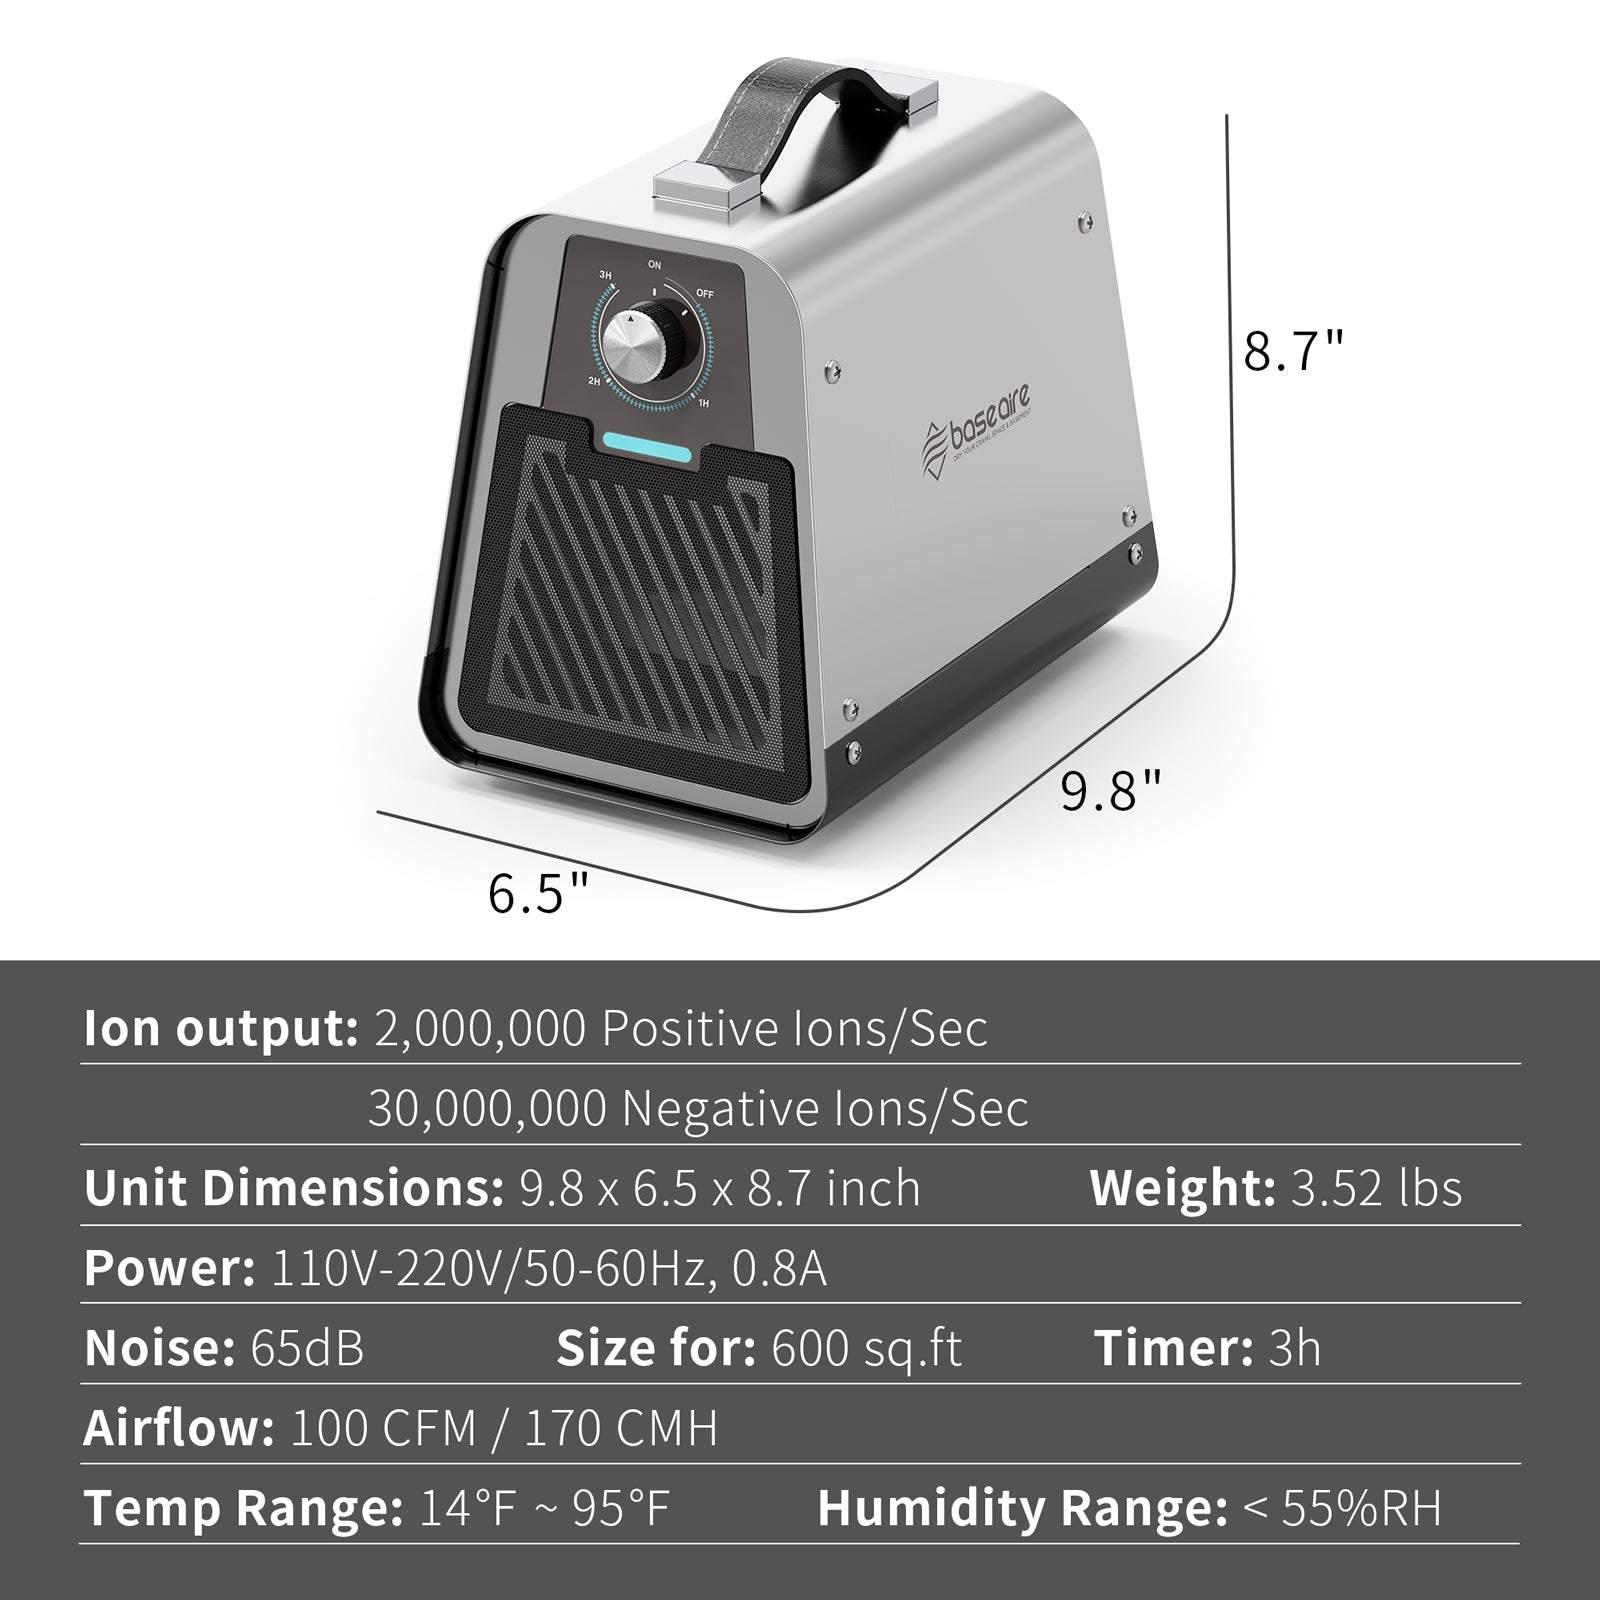 BaseAire 555 Pro Ion Machine with Highest Output - up to 30 Million Negative Ions/Sec, 2 Million Positive Ions/Sec - Ion Generator from [store] by Baseaire - Air purification, Ion Generator, pest control